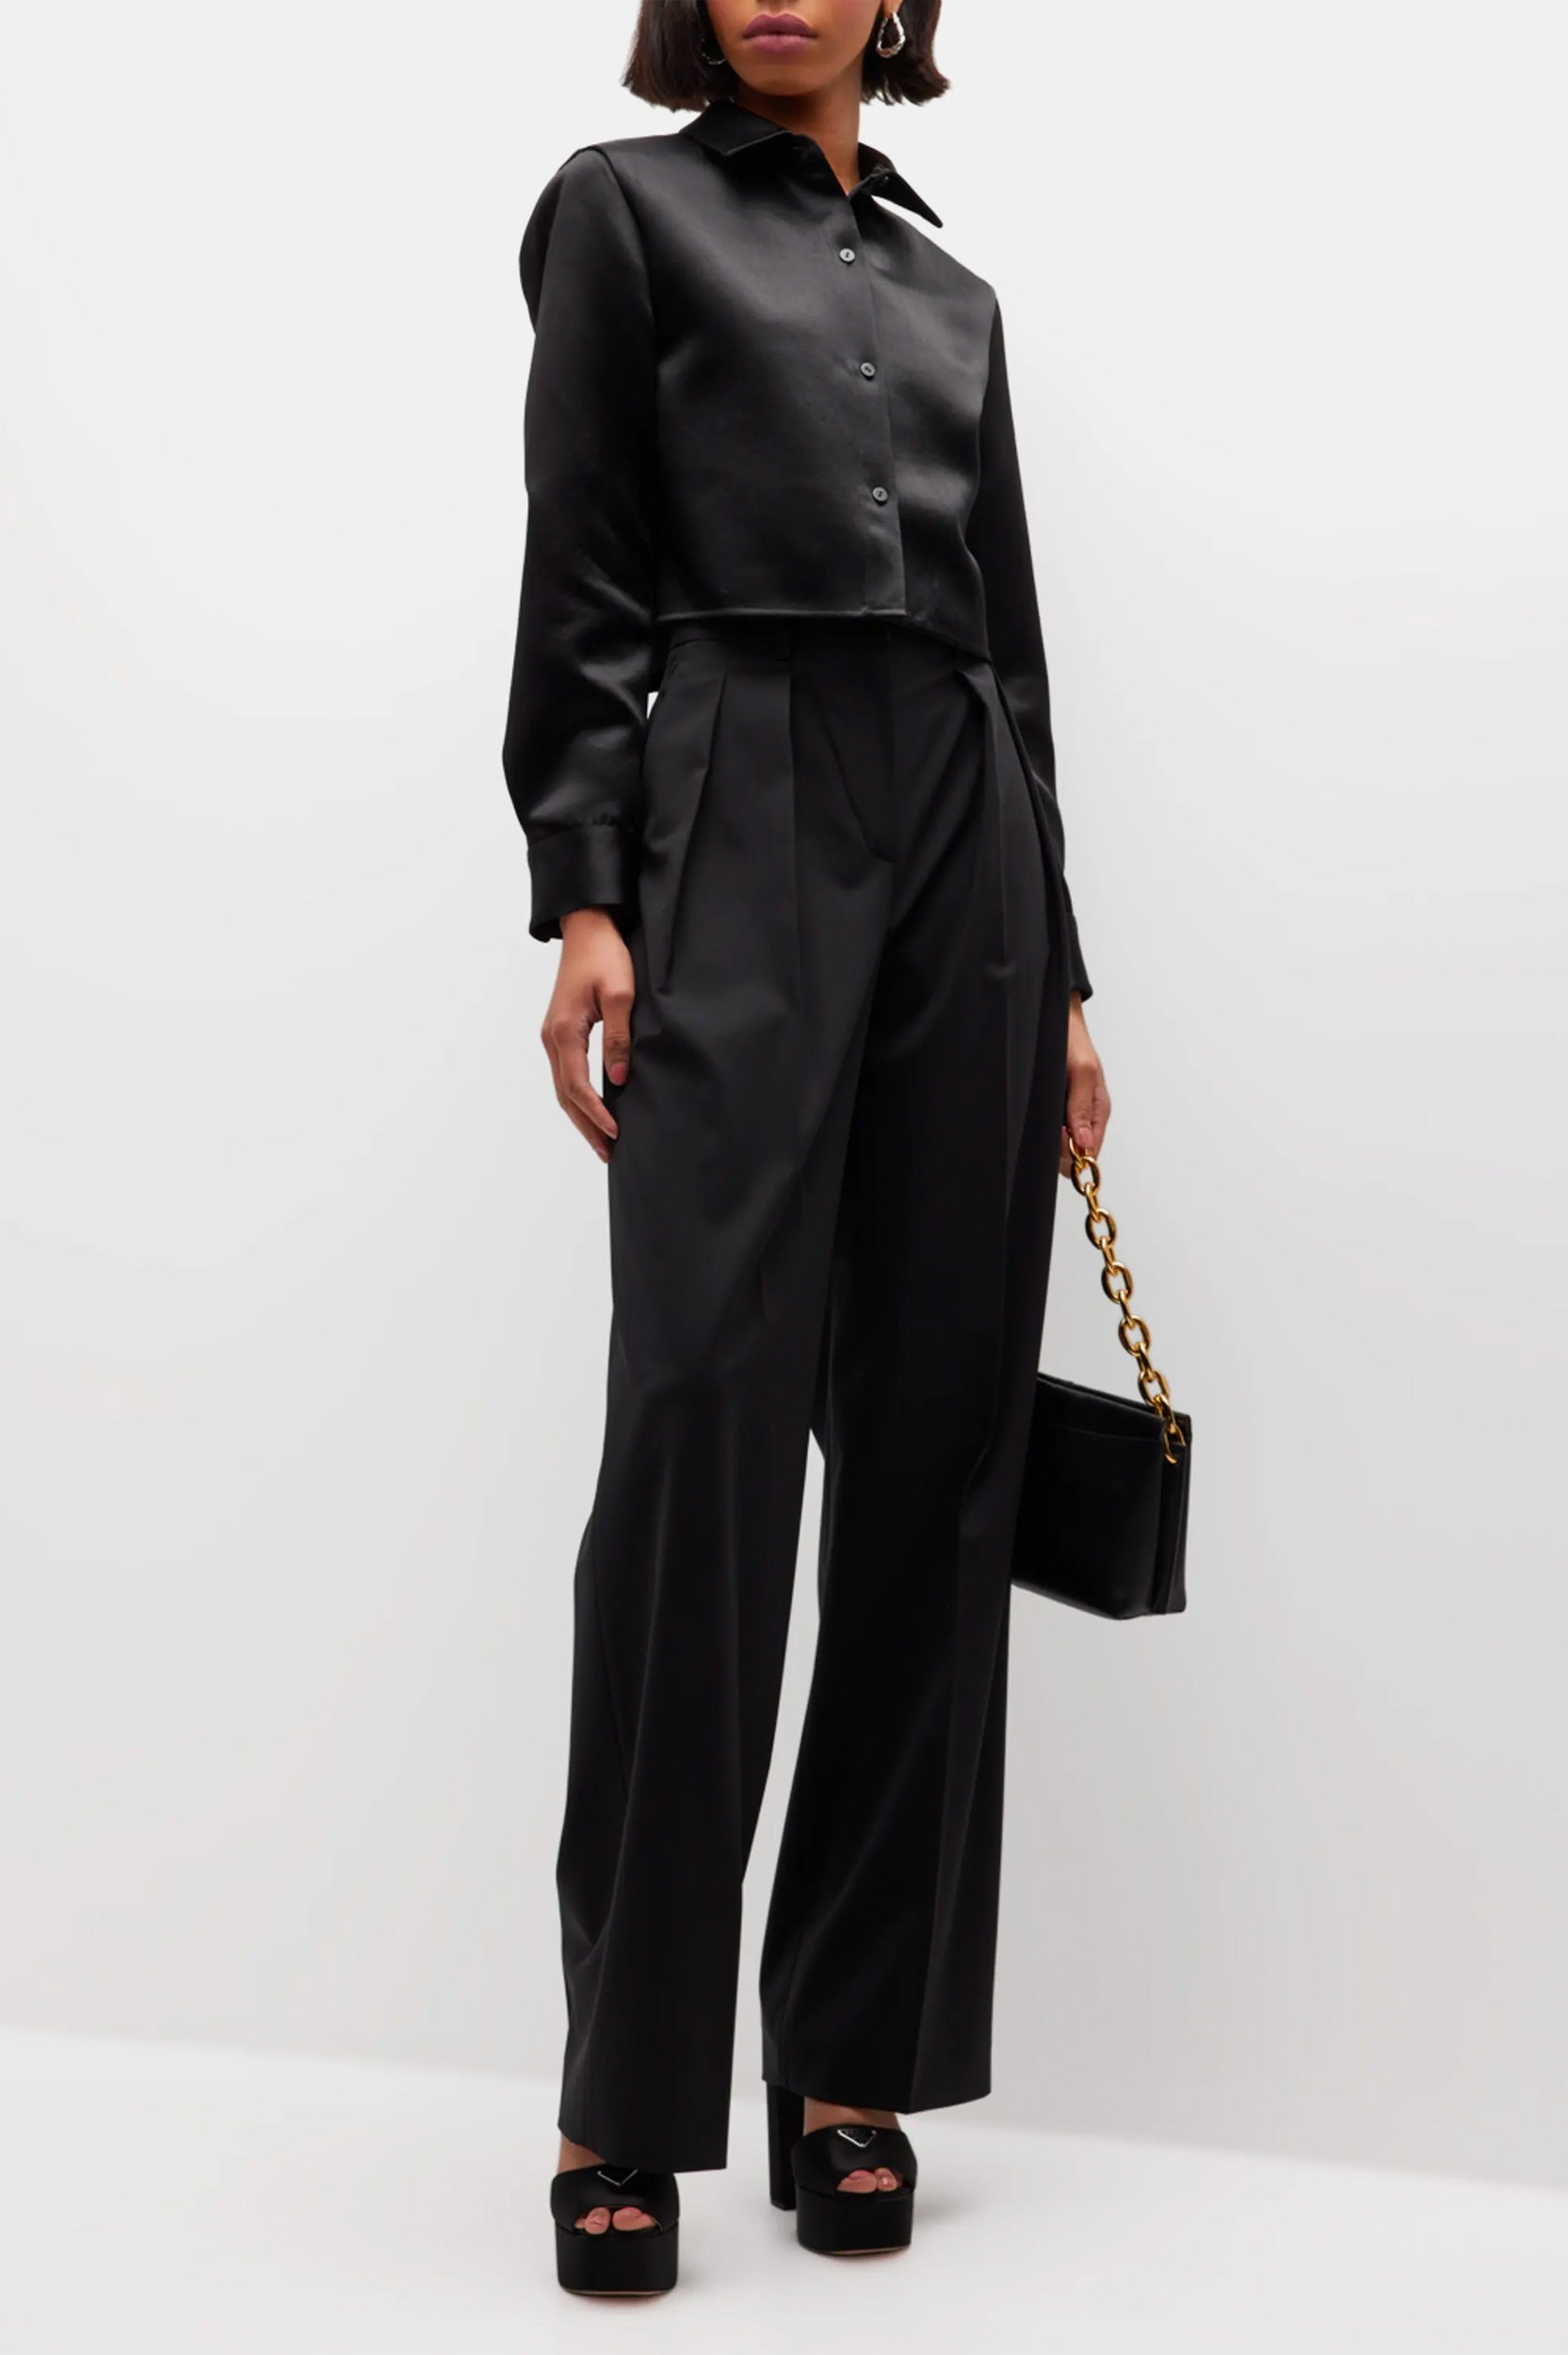 Double Pleat Pant in Black - Tall